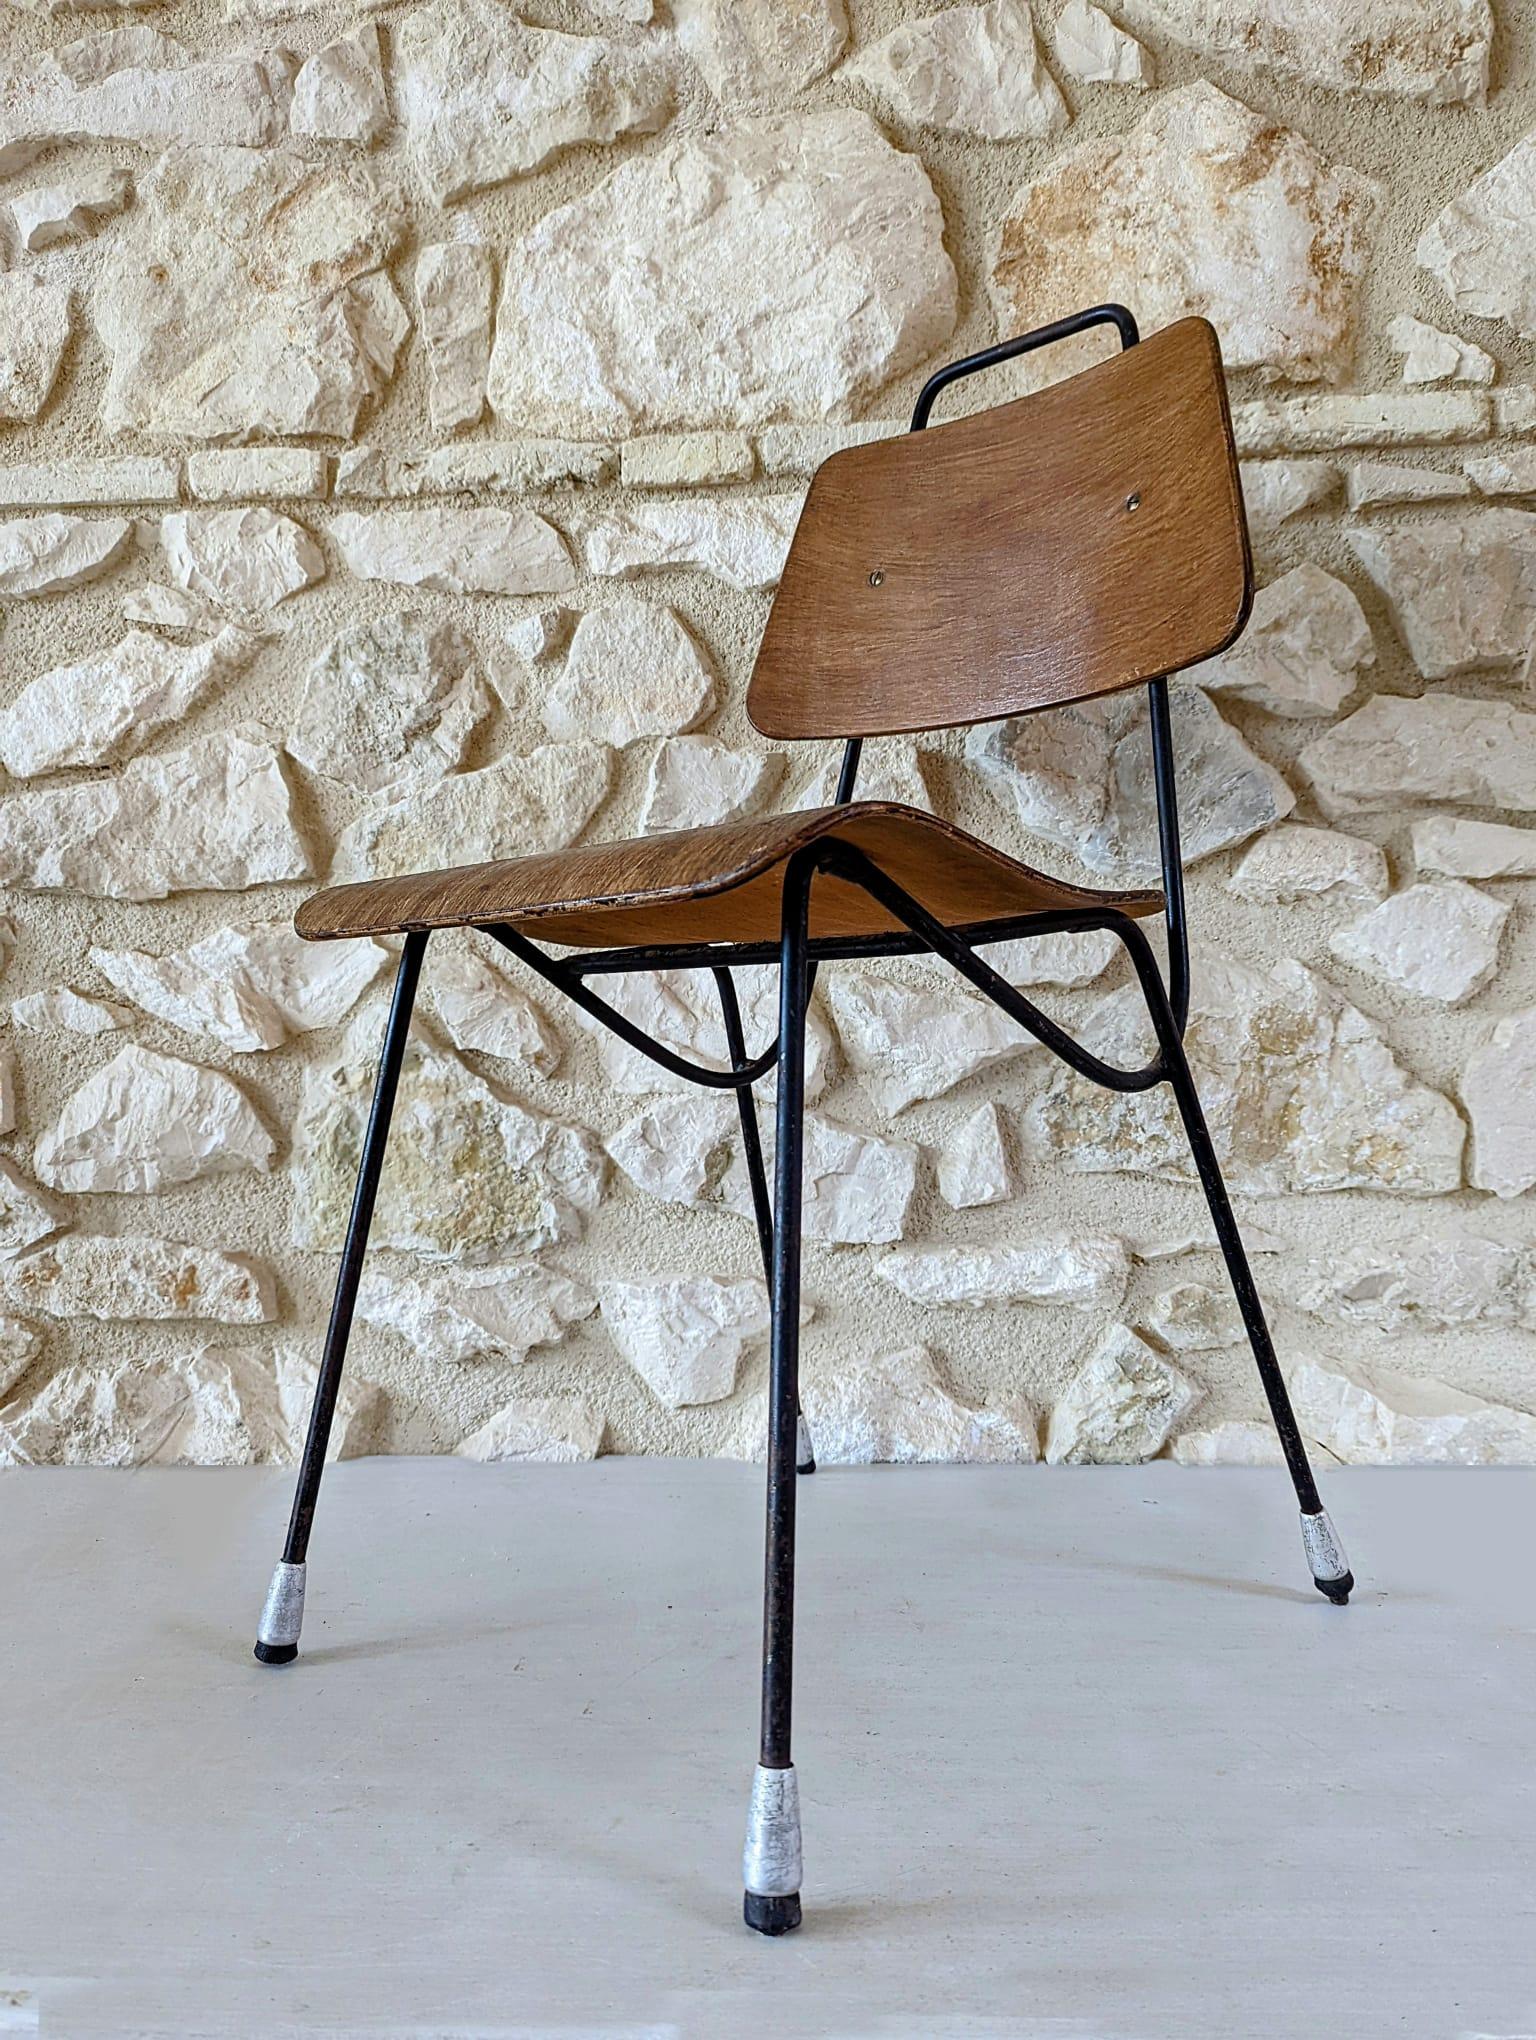 Mid-20th Century Set of 4 Chairs by Antoni De Moragas 1950s For Sale